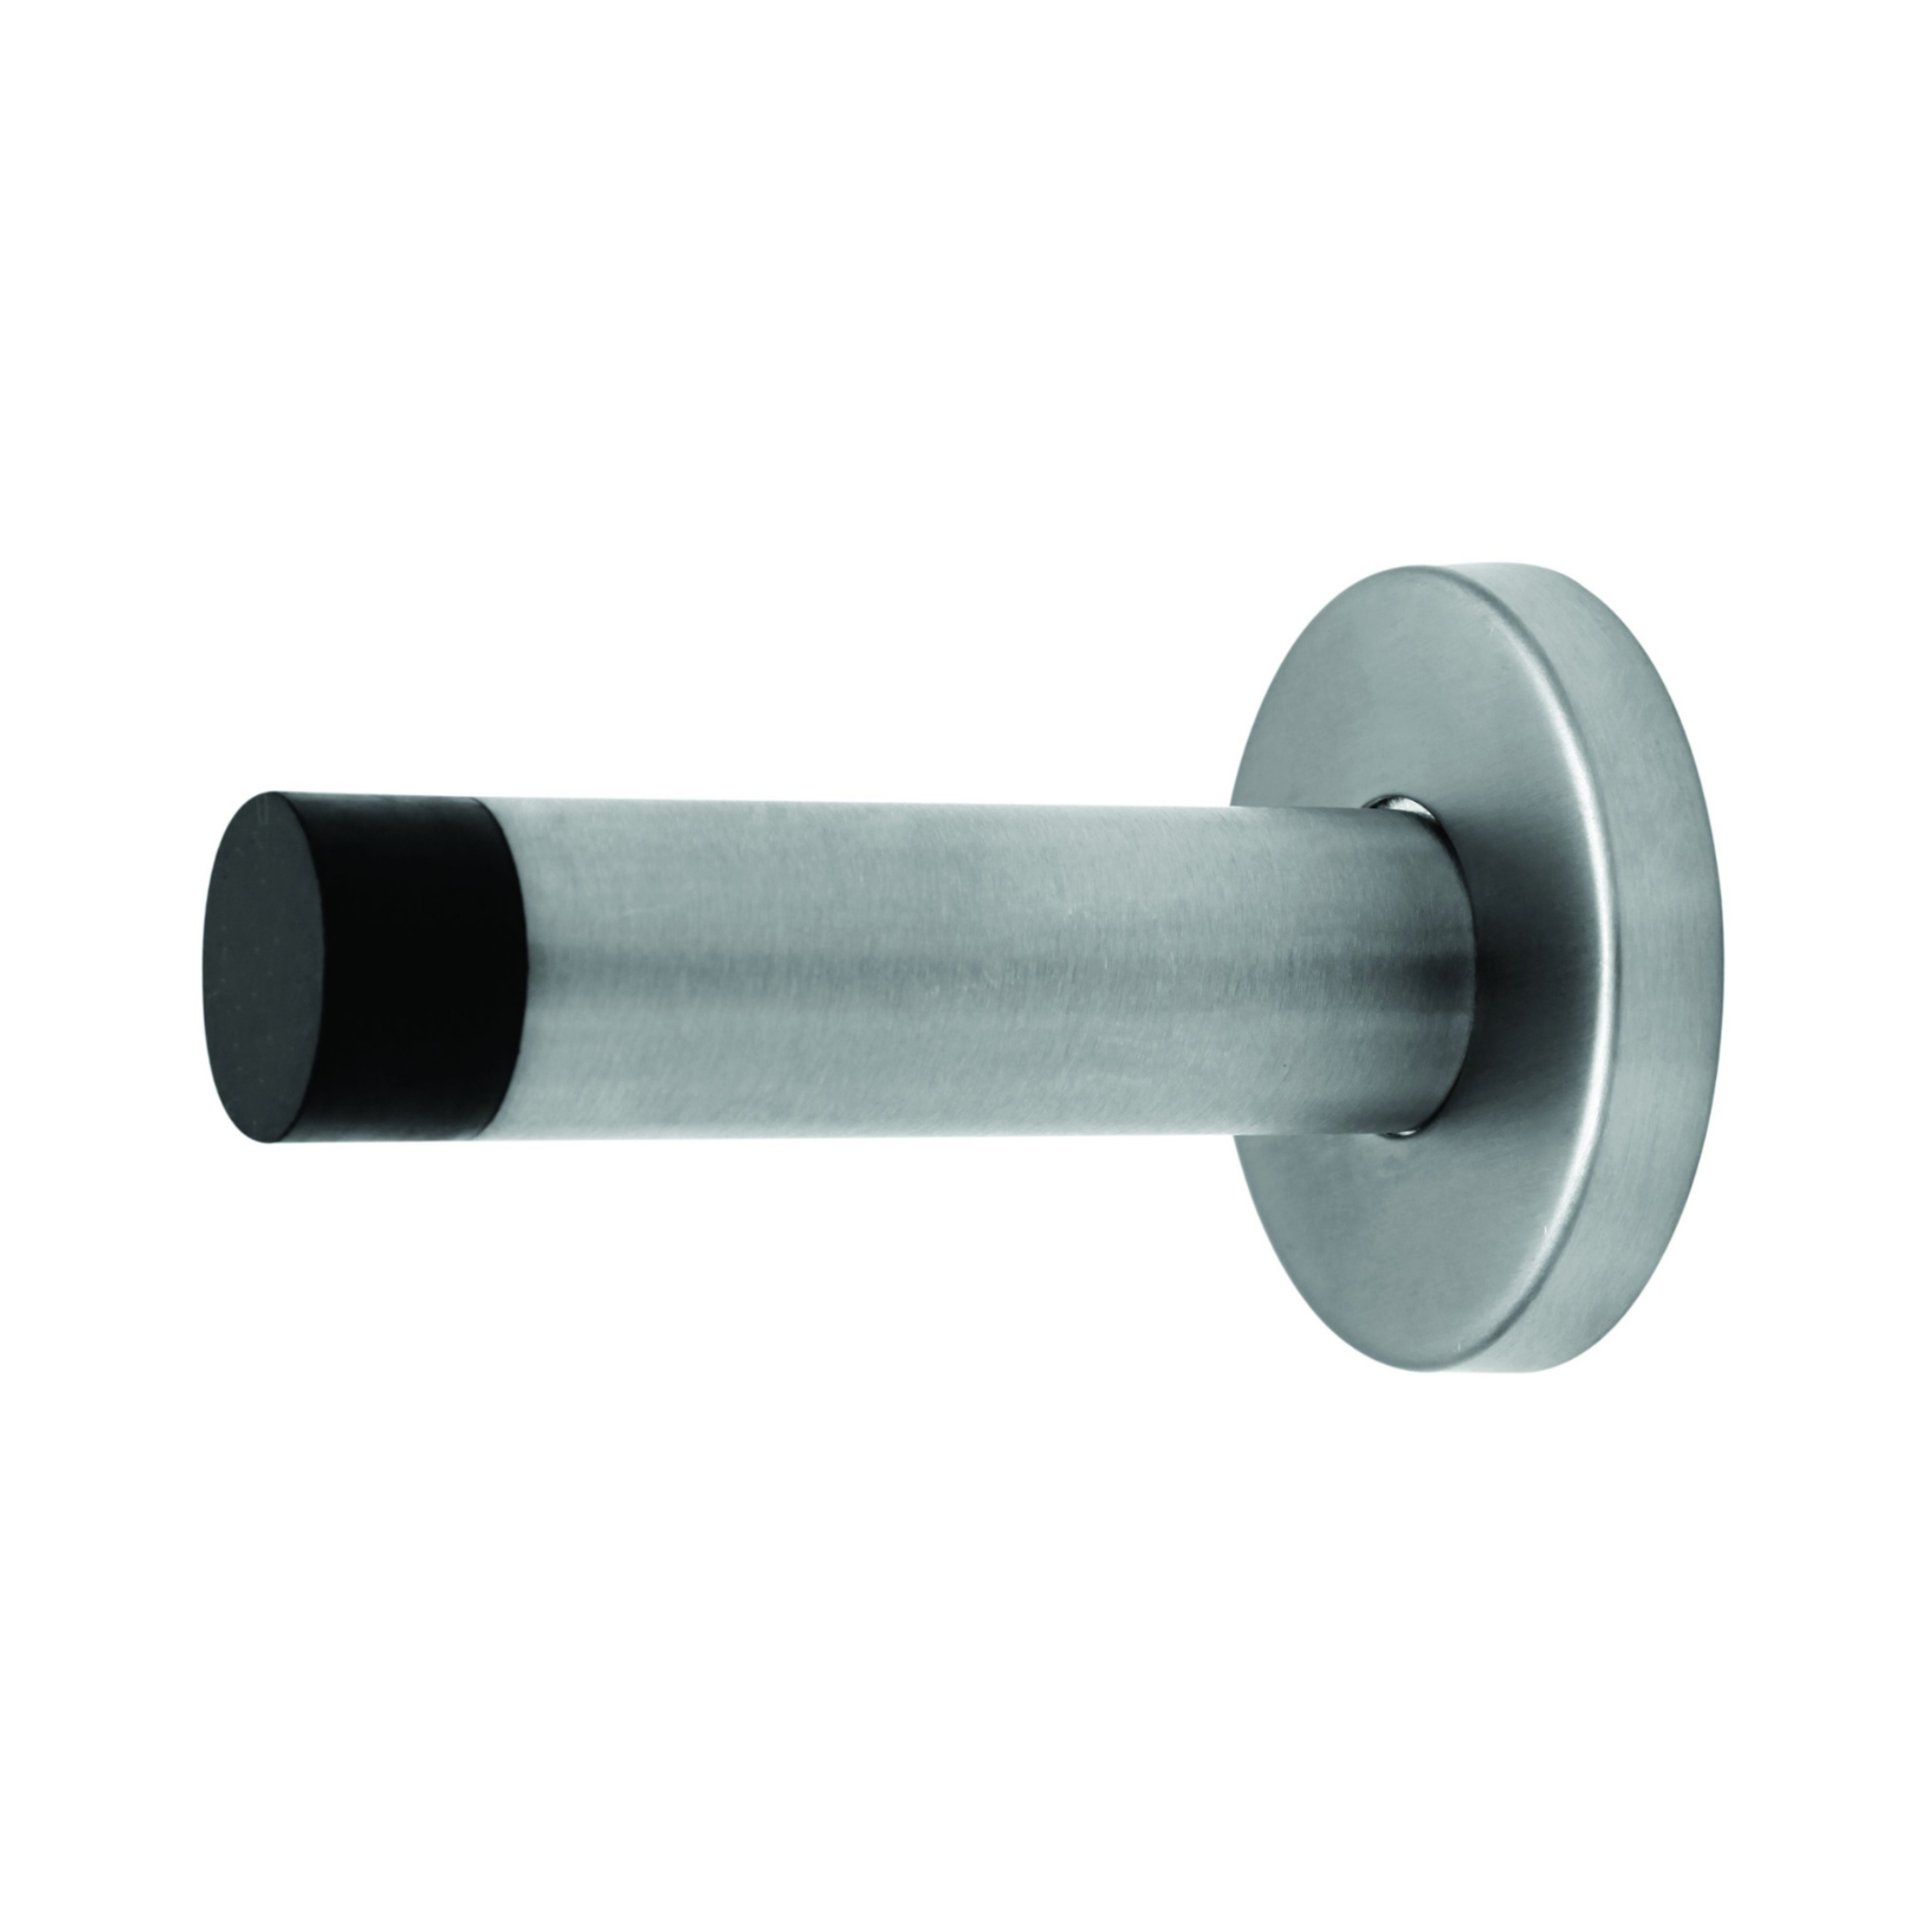 FDS02.SS, Door Stop, Wall Mounted, Round, 90mm (l) x 19mm (Ø), Stainless Steel, CISA